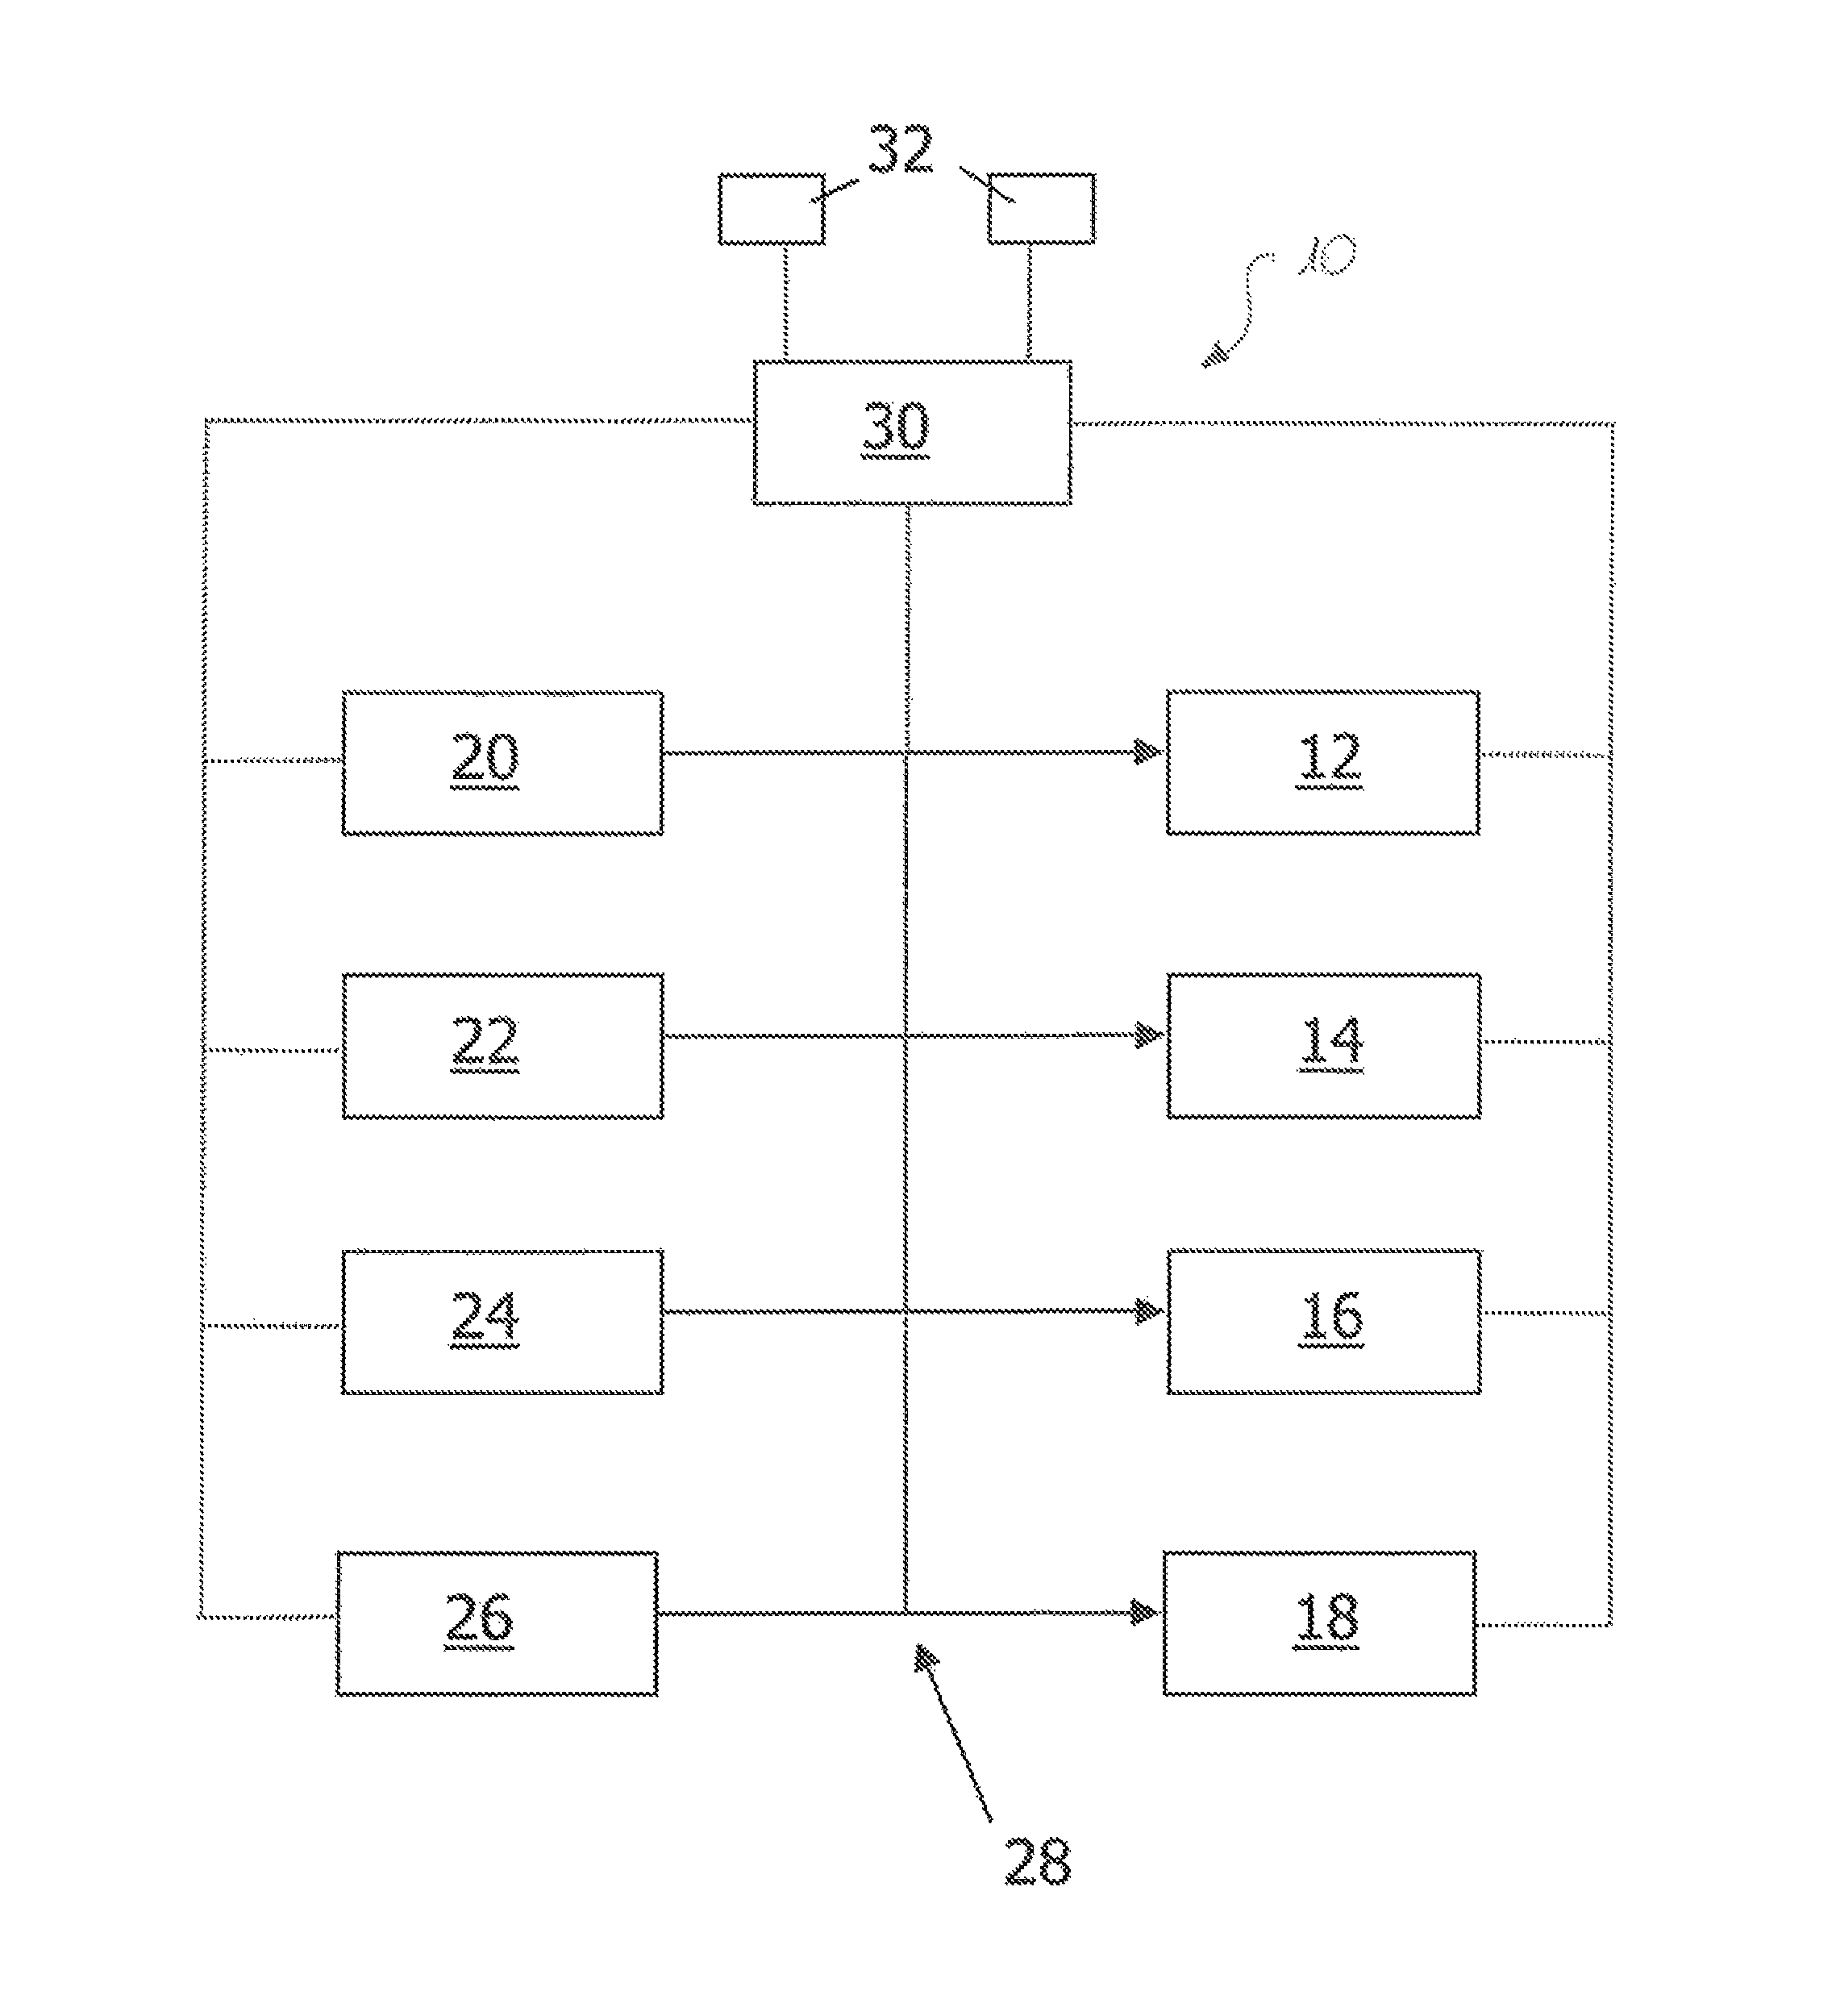 System and method for cooling and/or heating aircraft devices